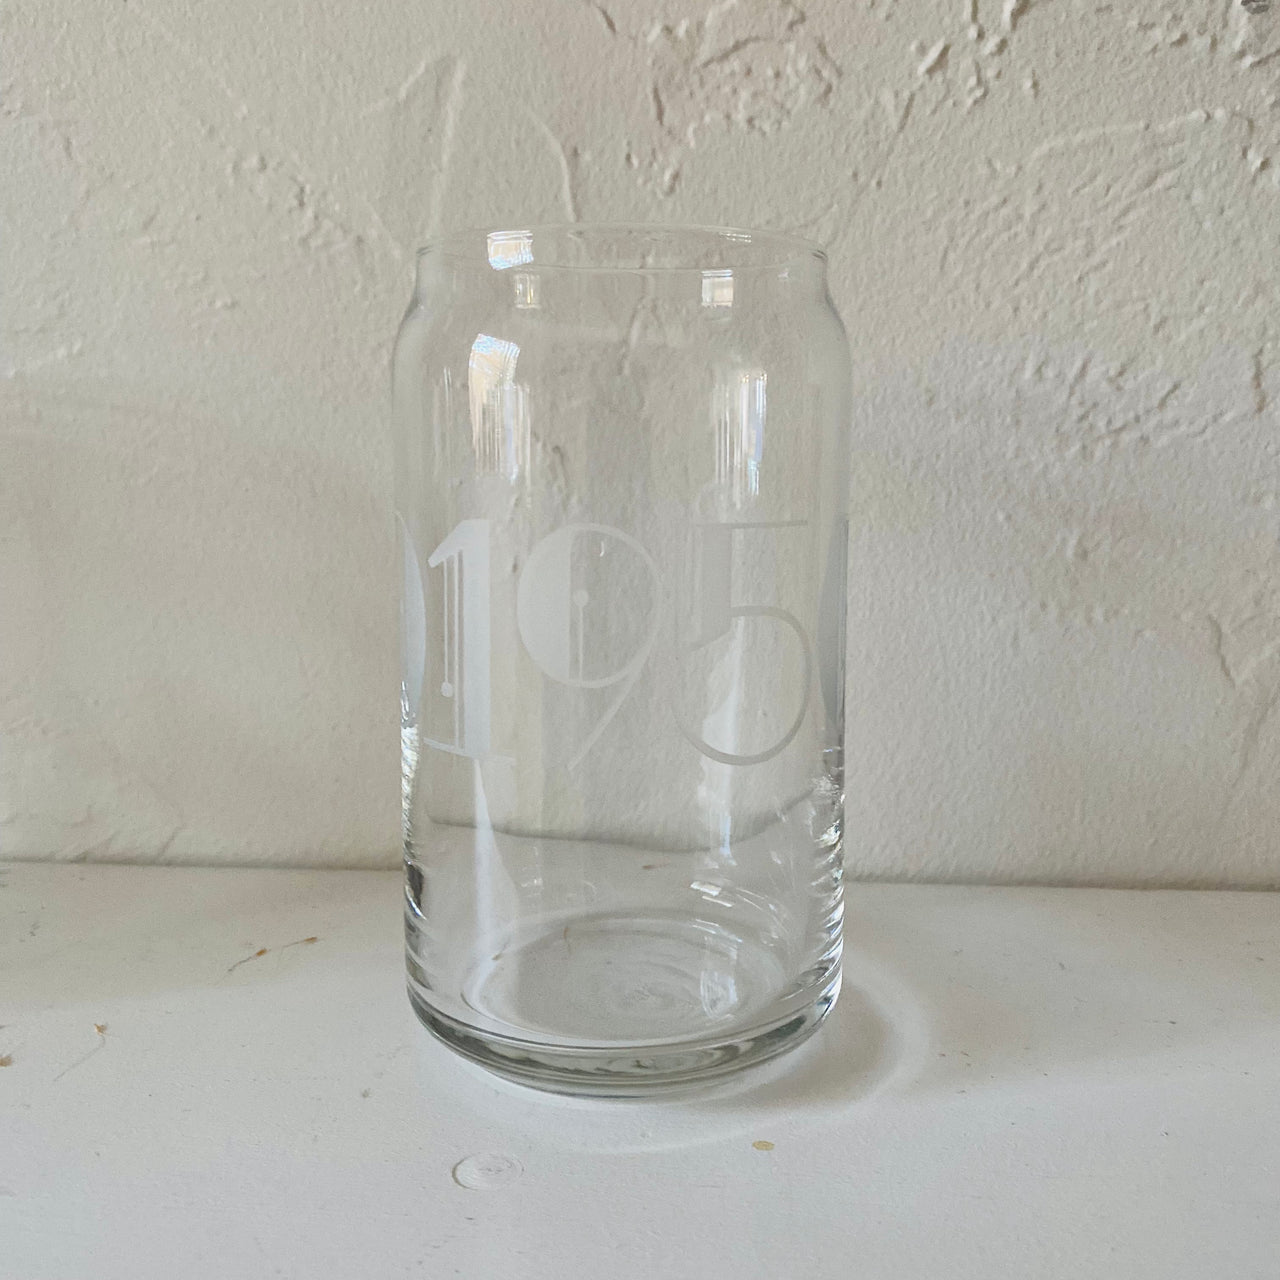 01950 NBPT Zip Code Etched CAN Glass